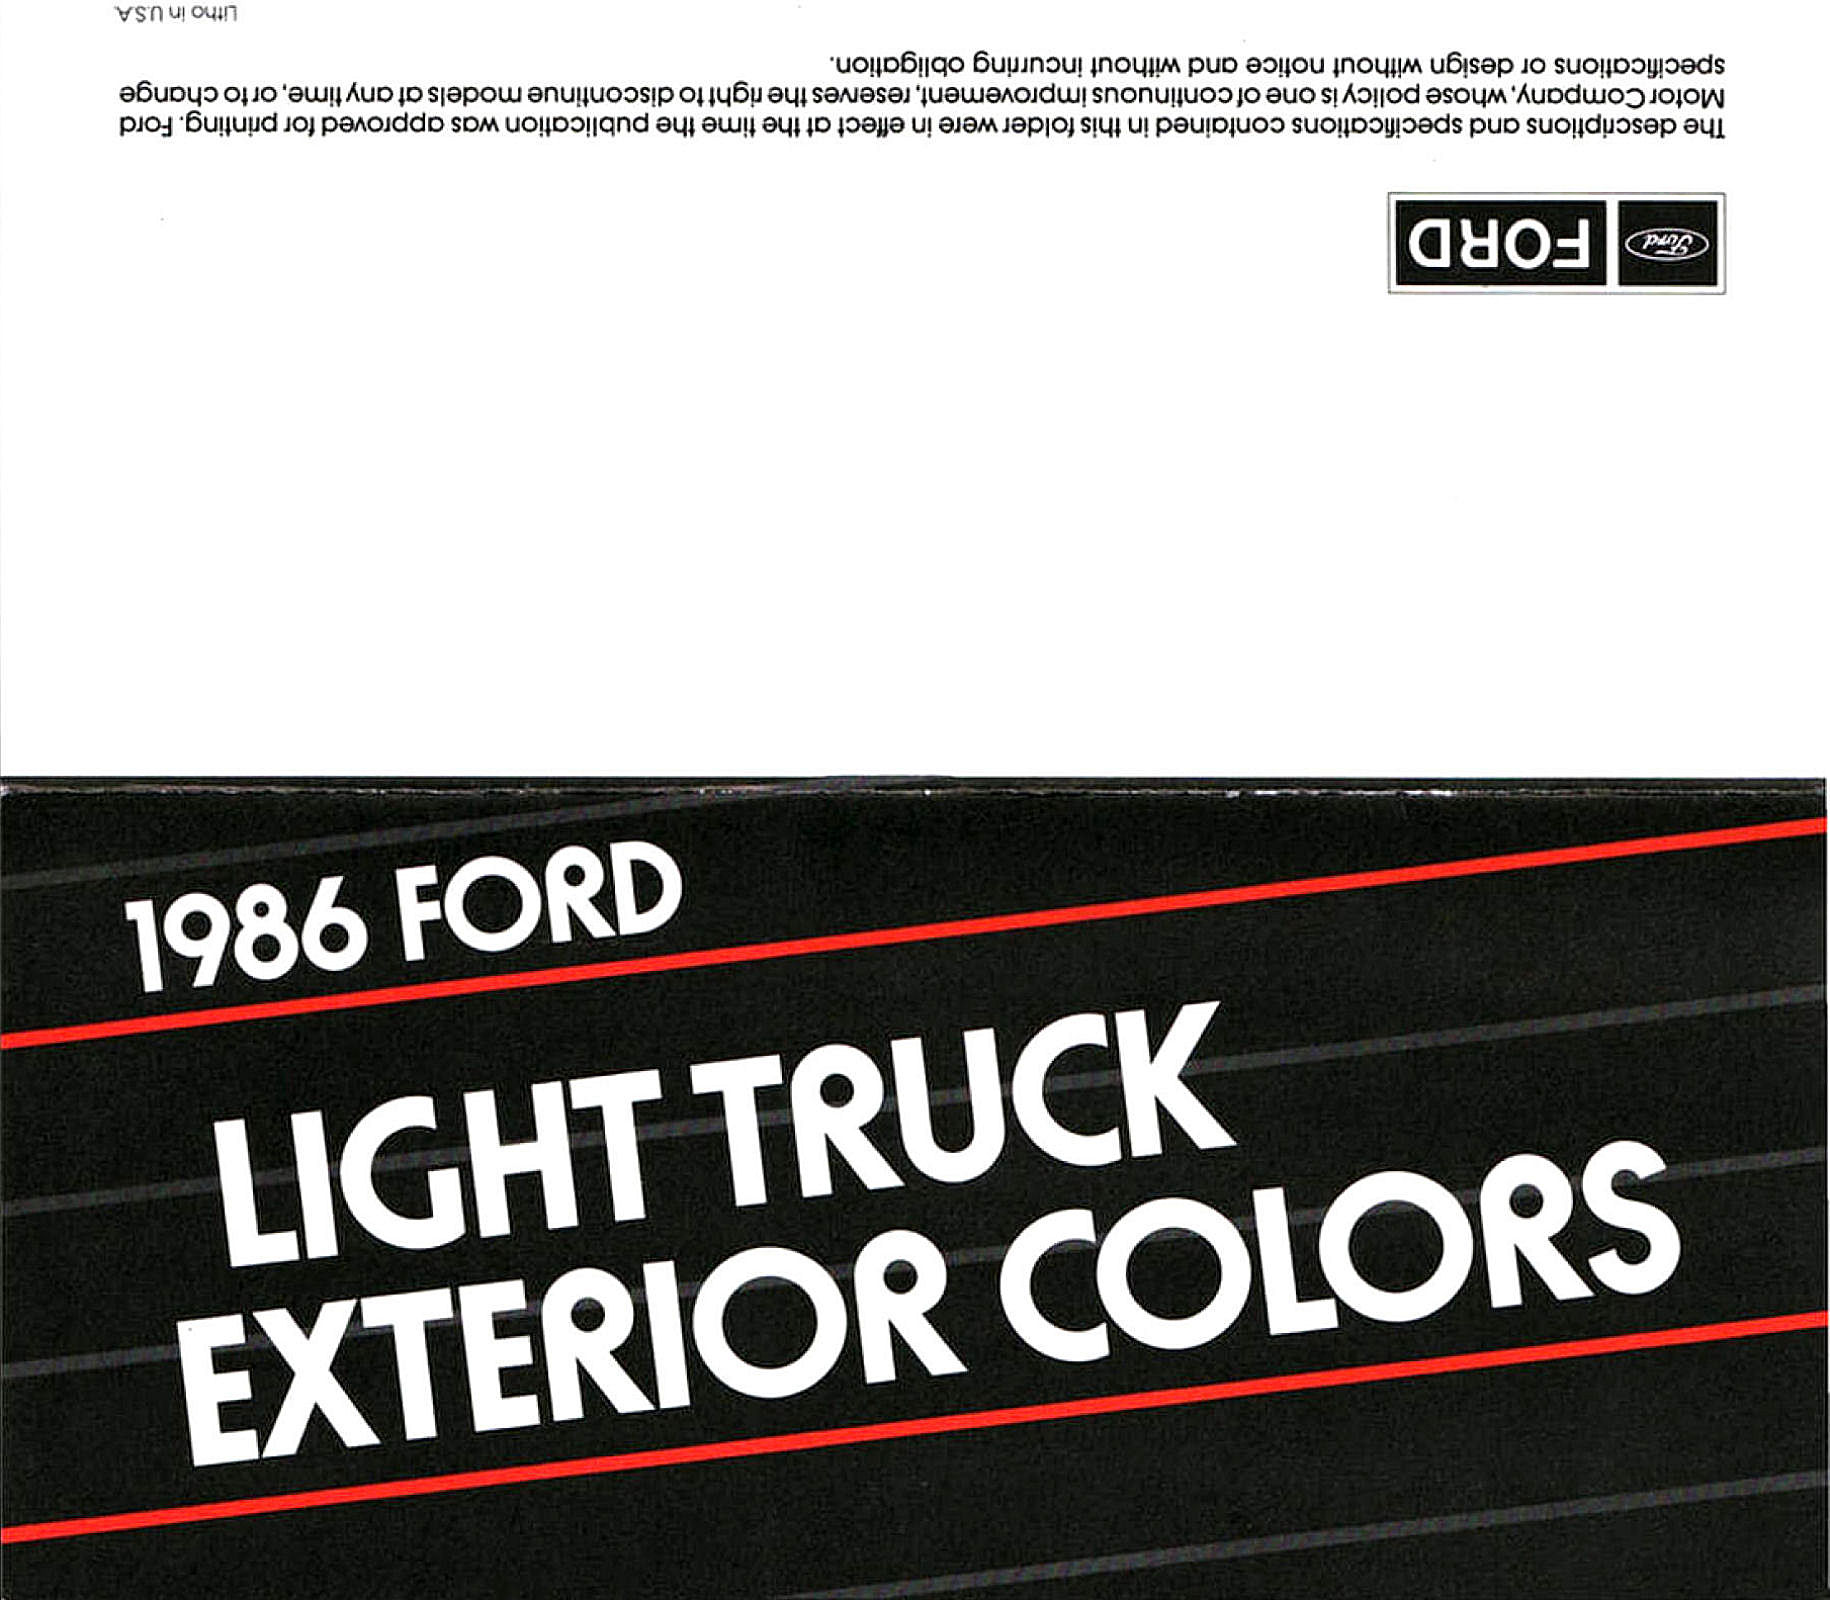 1986 Ford Light Truck Colors-04-01